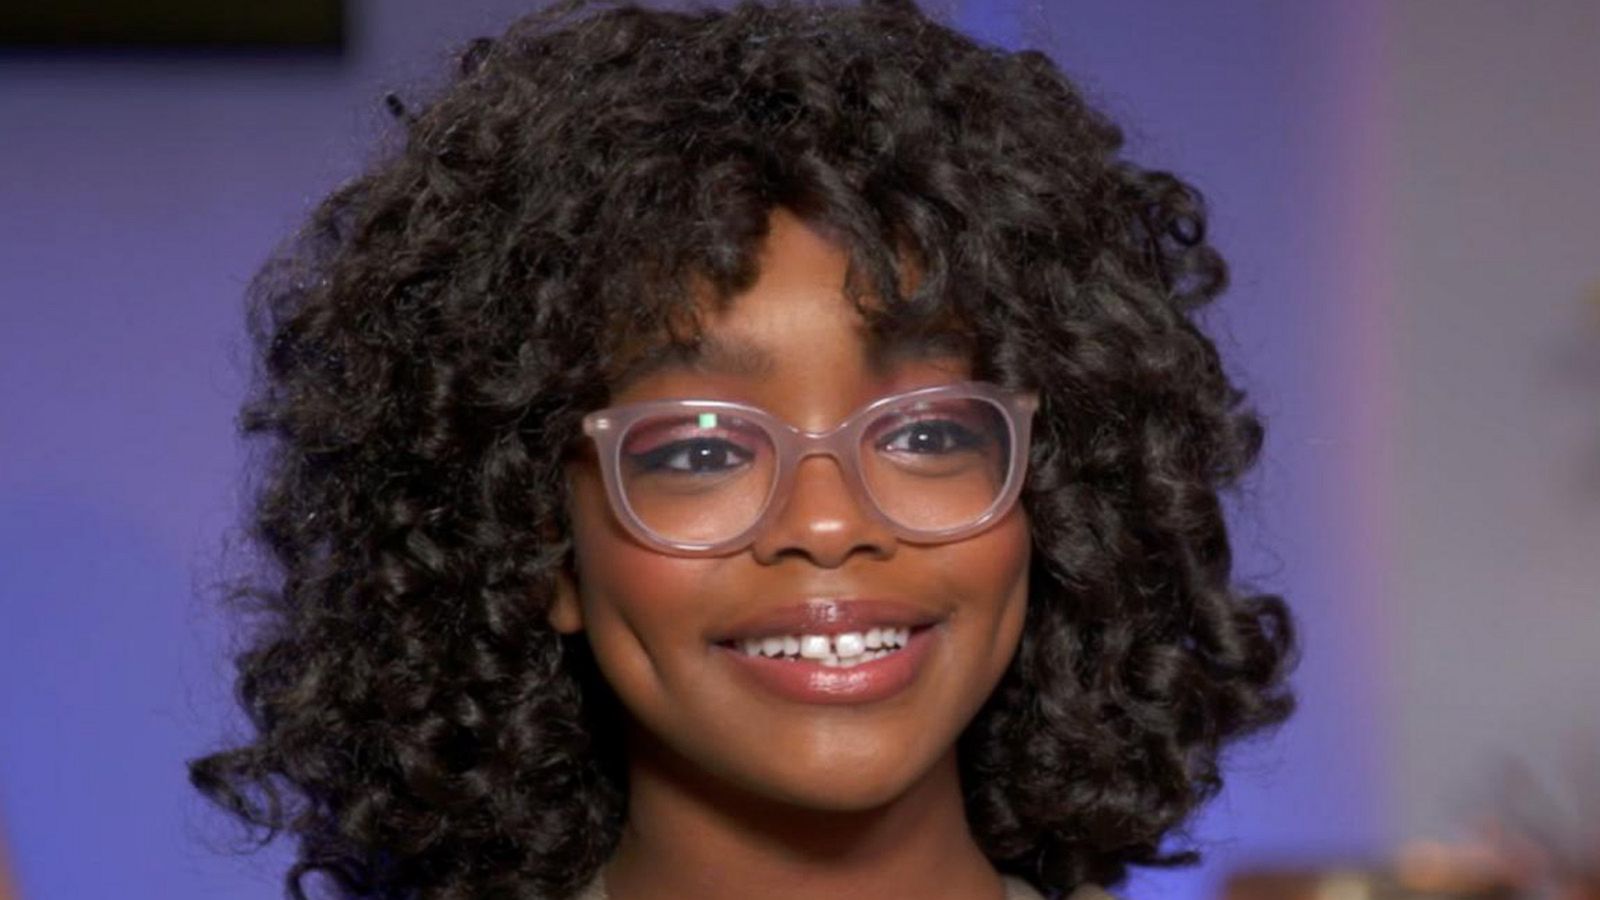 14-year-old Marsai Martin's journey from 'Black-ish' star to creating ...